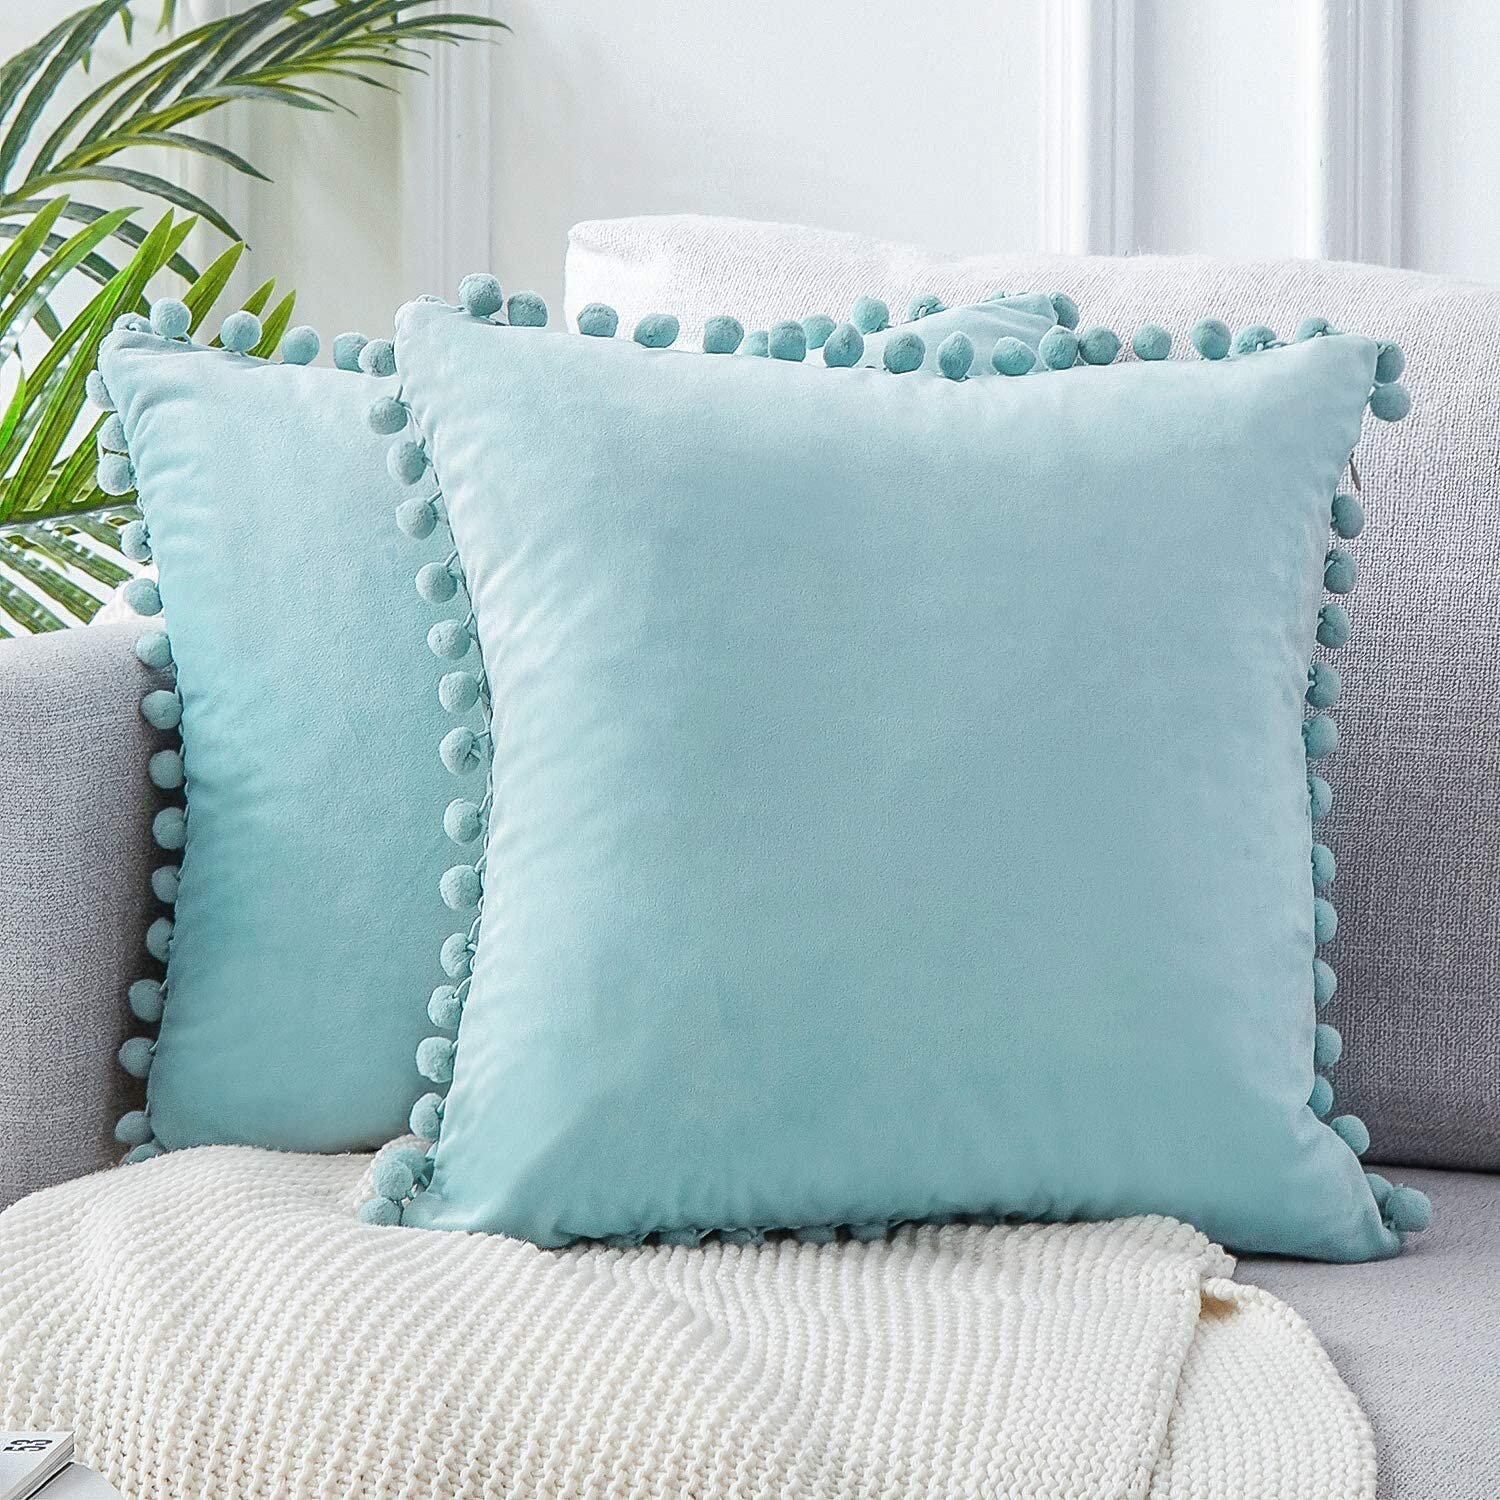  Top Finel Decorative Throw Pillow Covers with Pom-poms